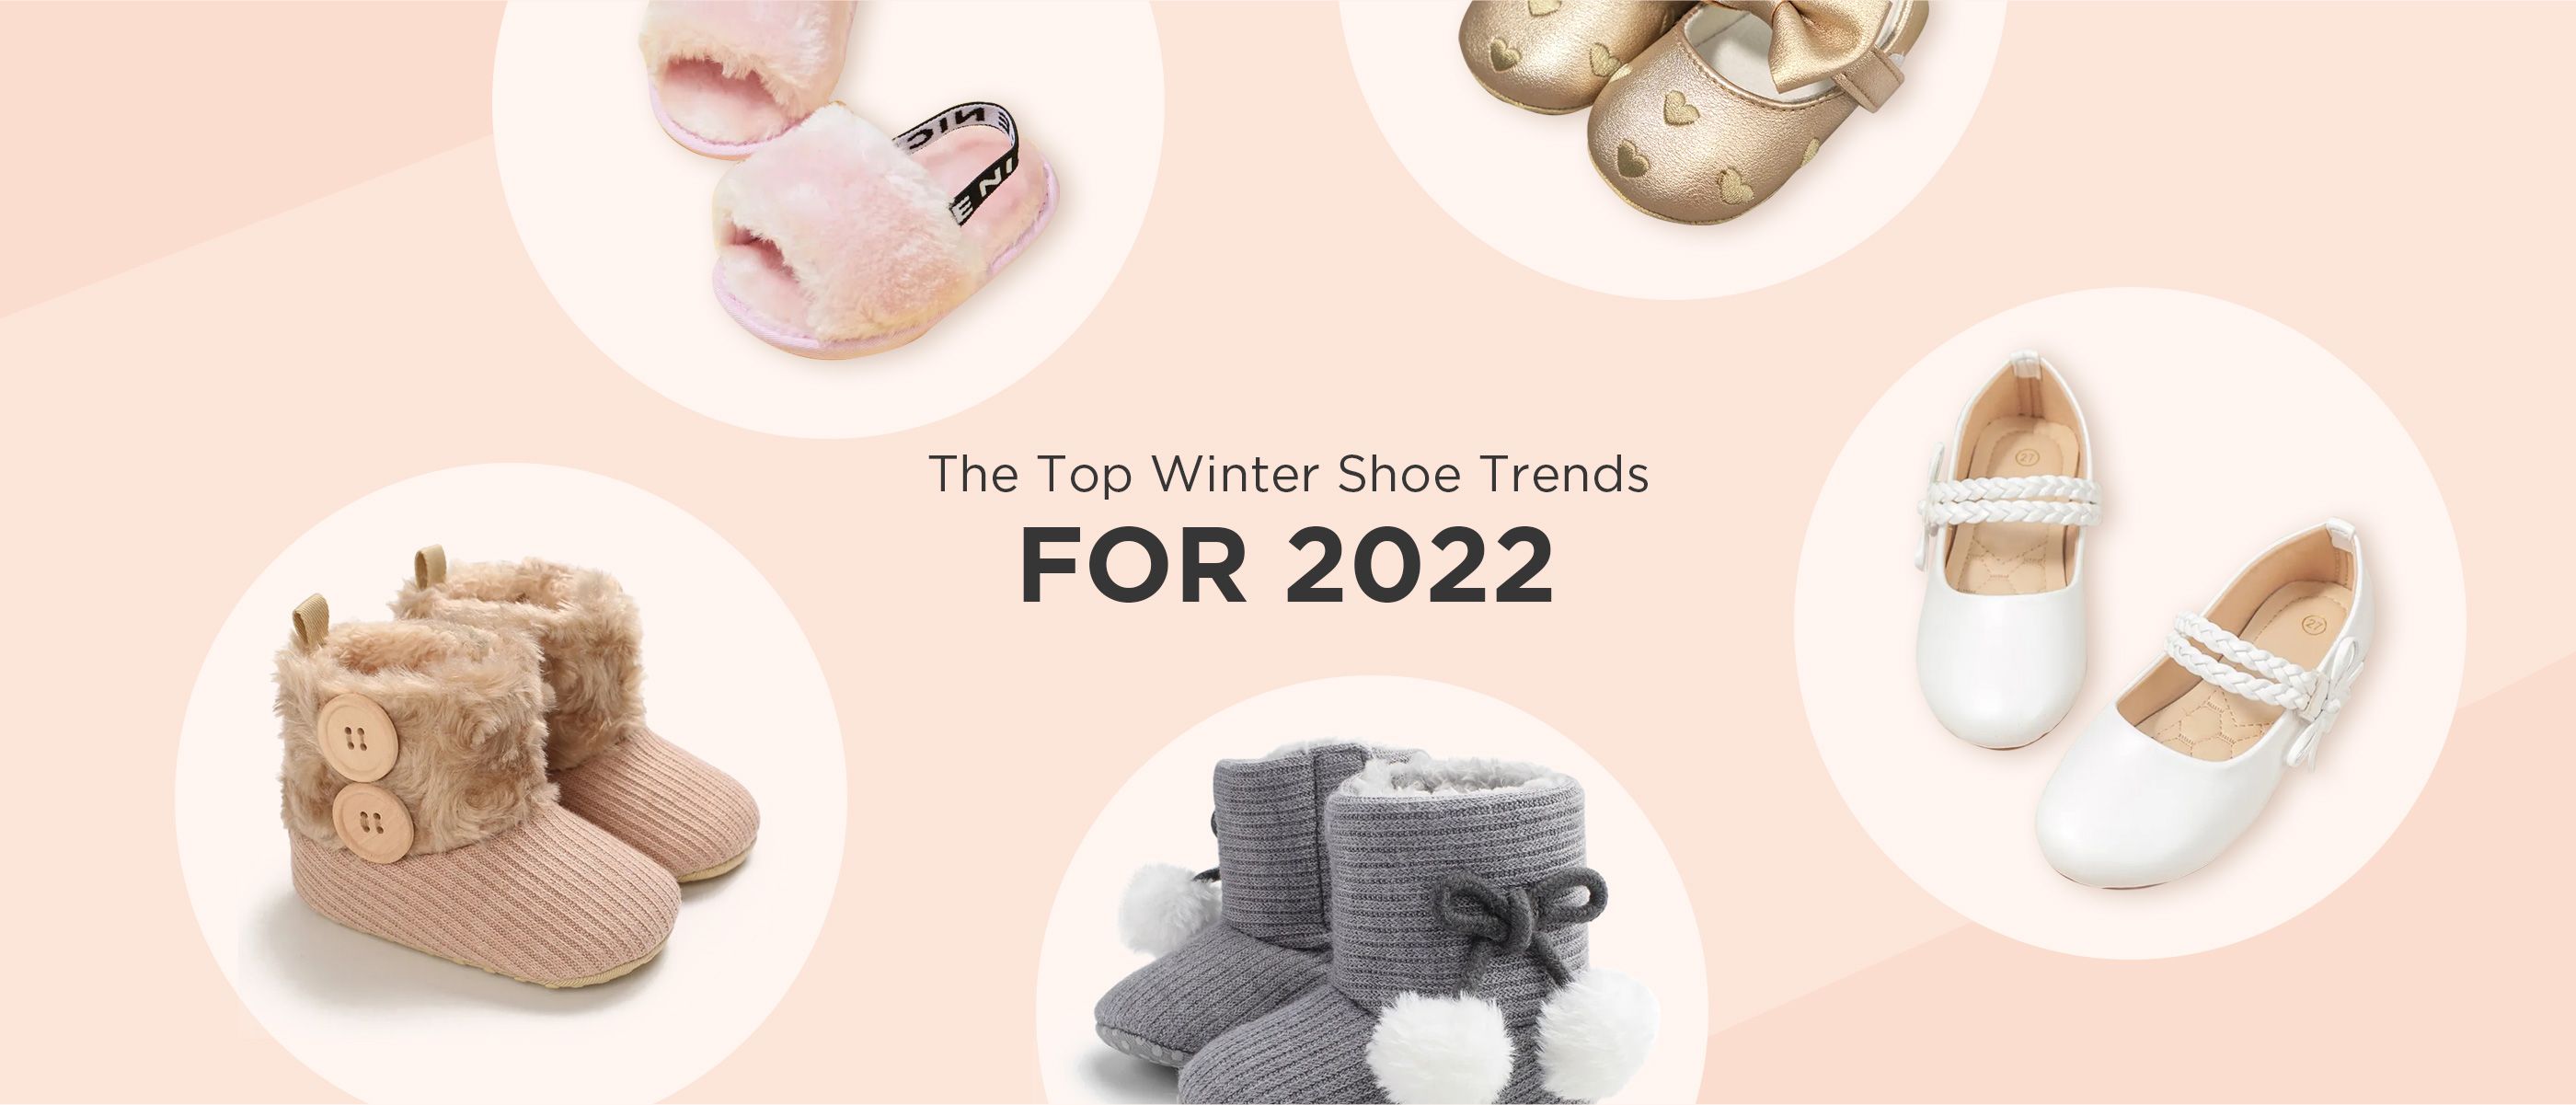 The Top Winter Shoe Trends for 2022